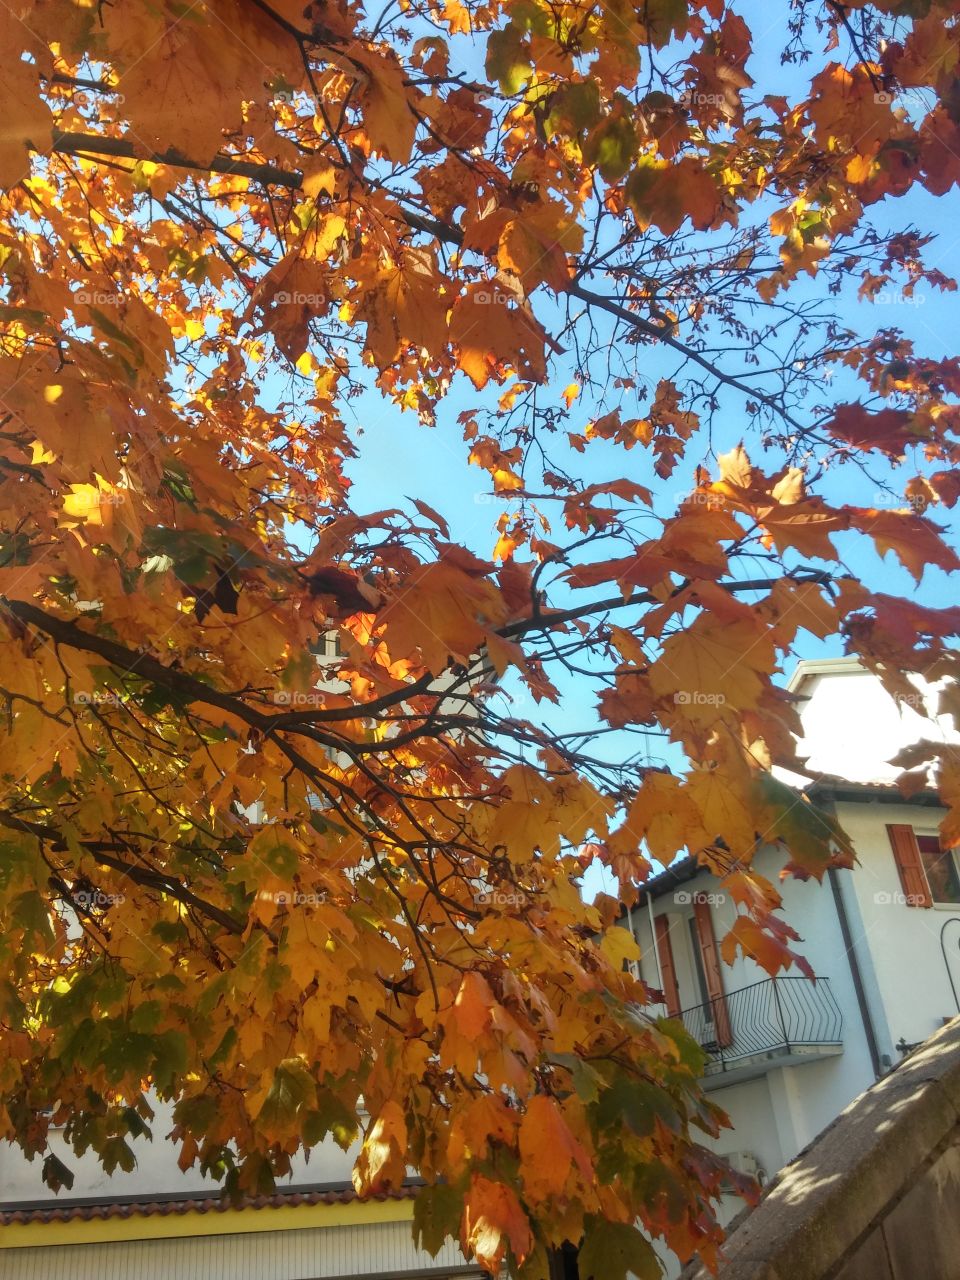 Autumn is here